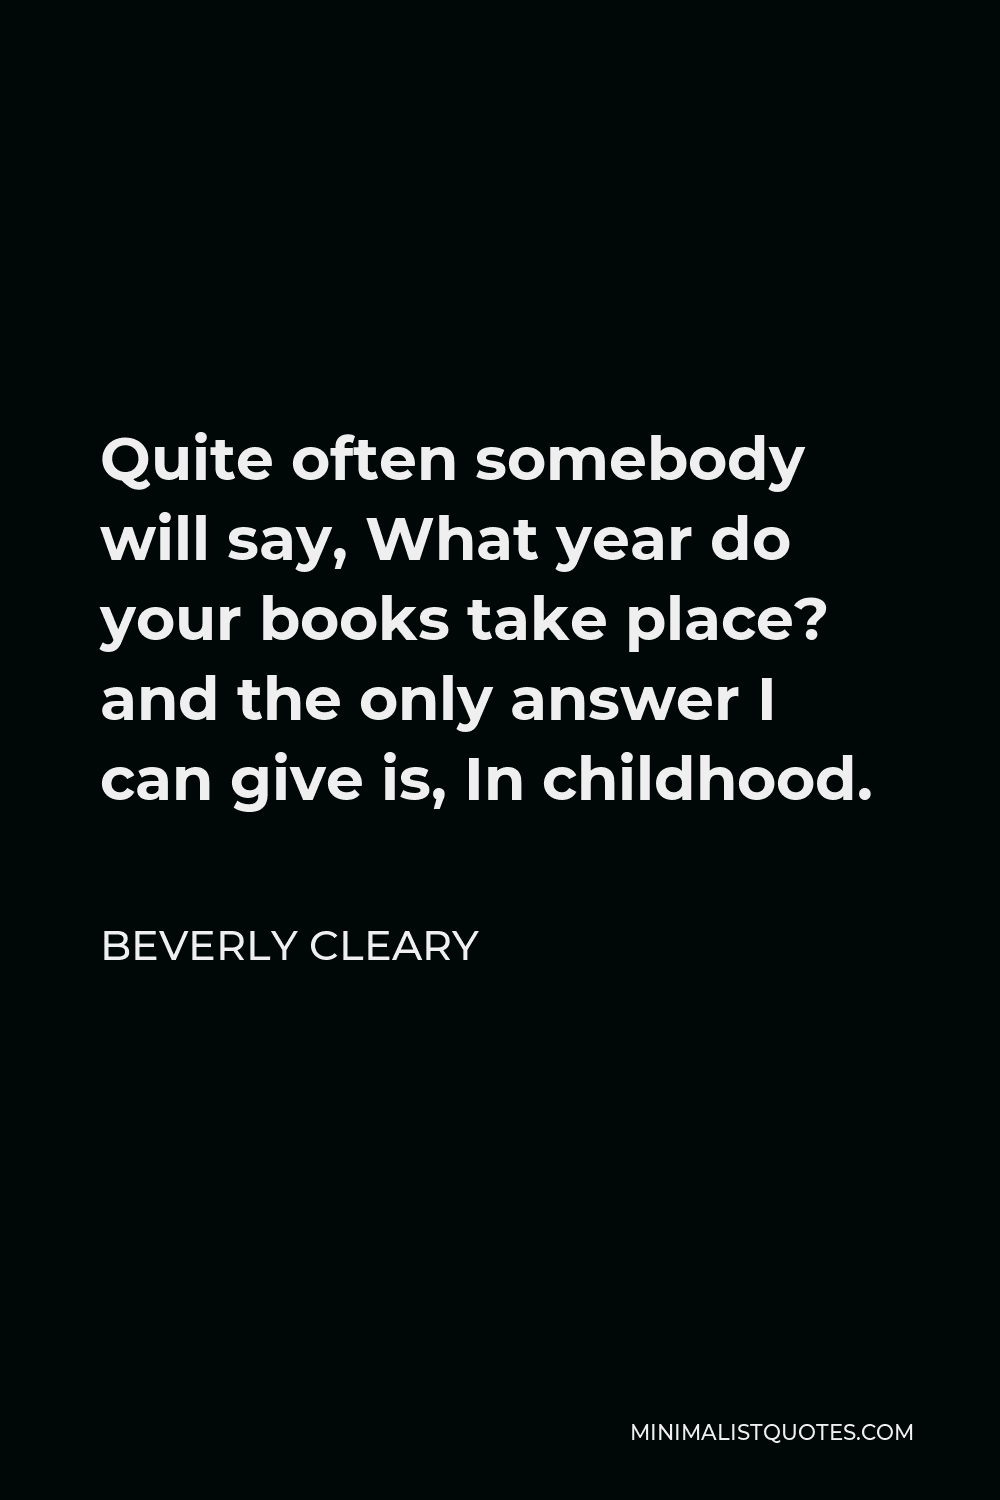 Beverly Cleary Quote - Quite often somebody will say, What year do your books take place? and the only answer I can give is, In childhood.